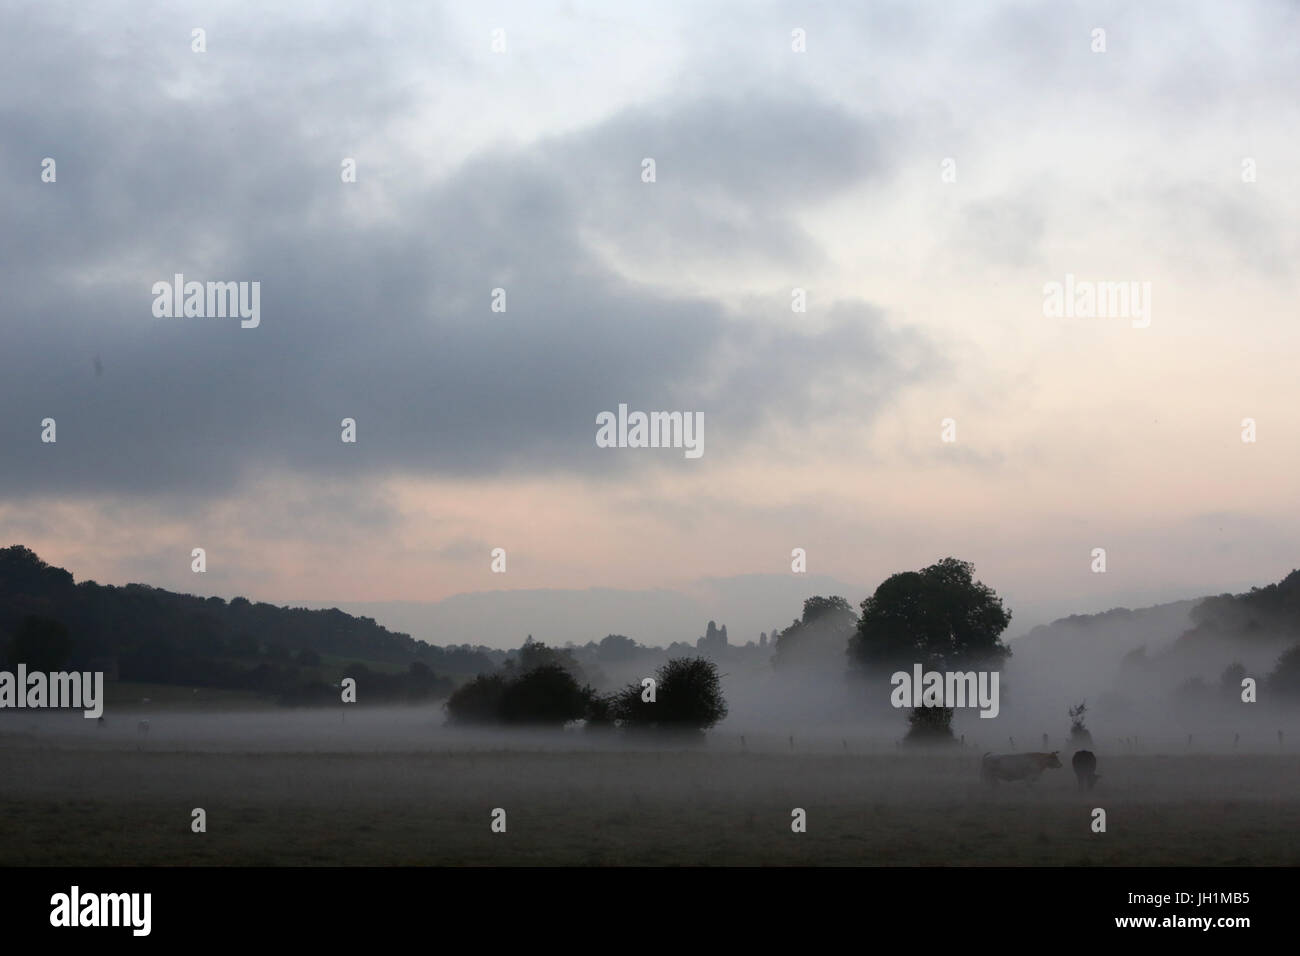 Misty landscape with cows. France. Stock Photo